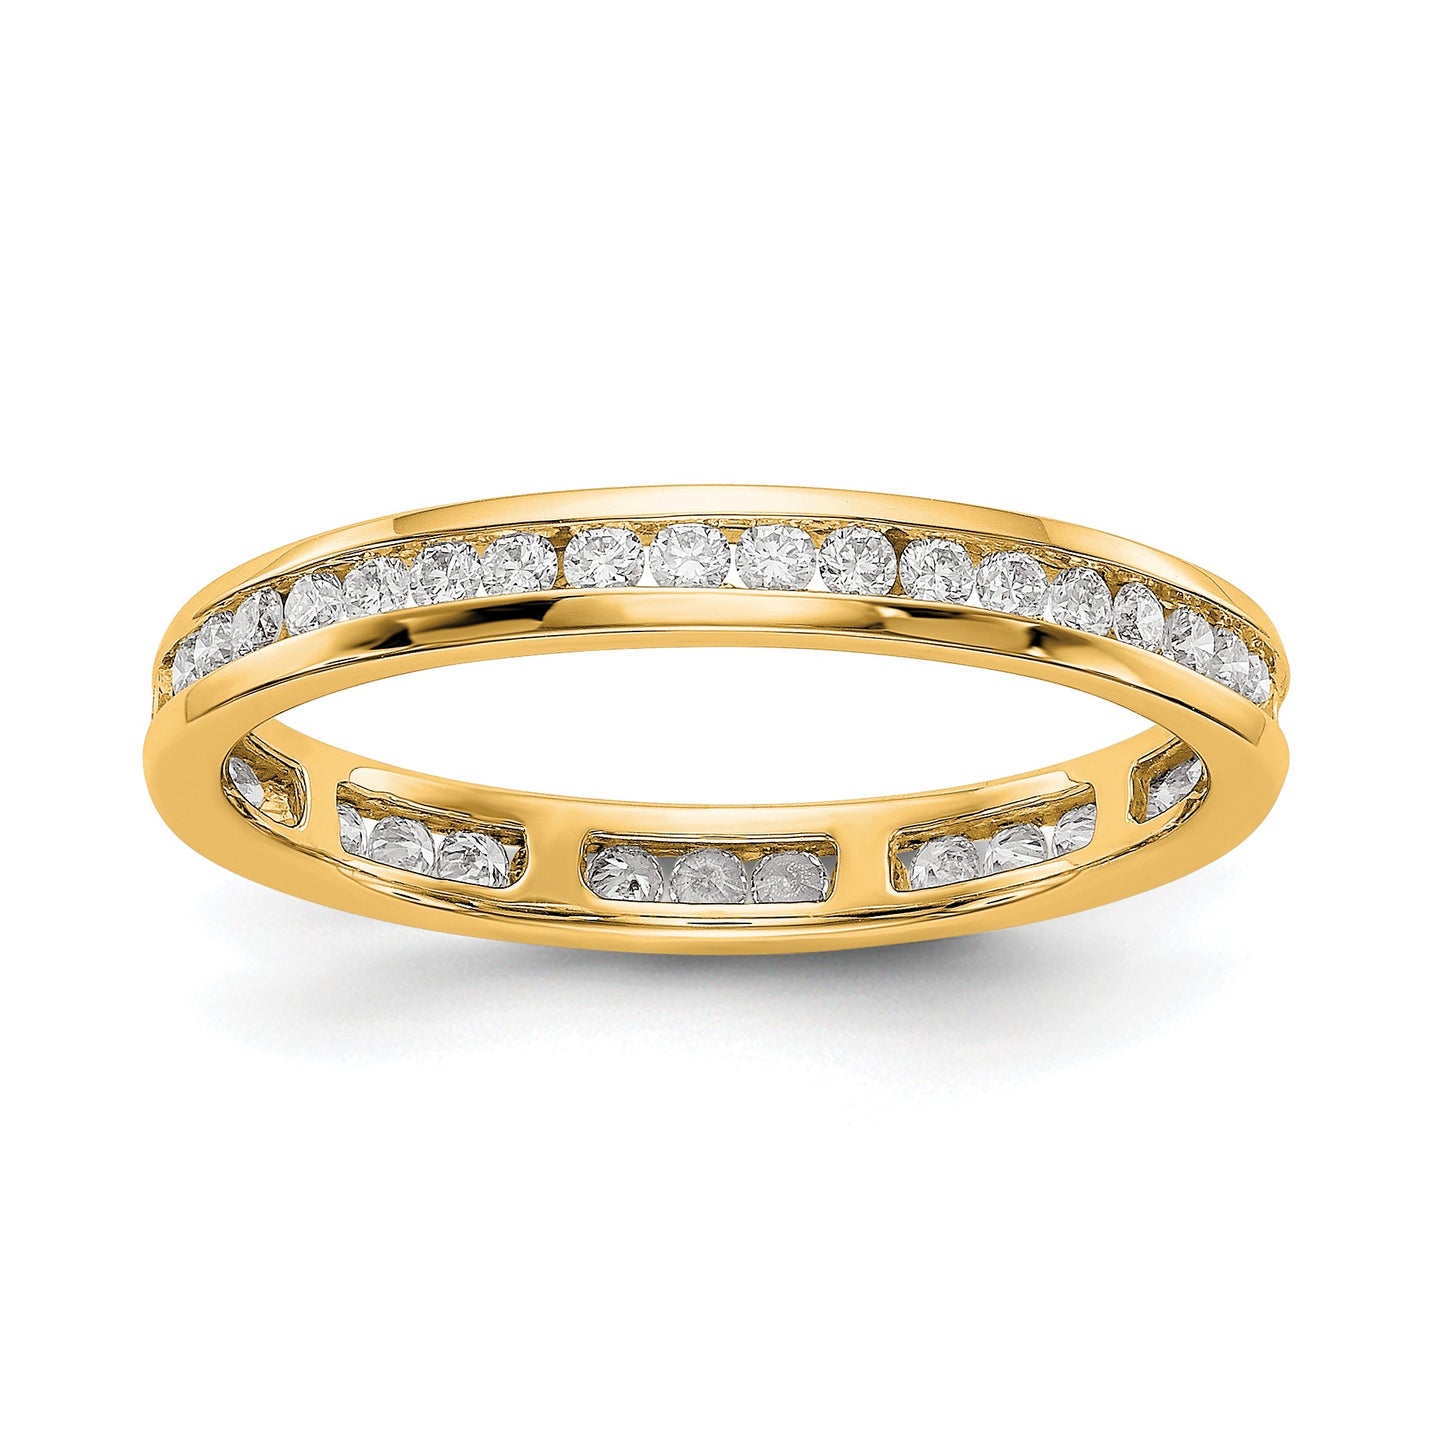 1/2 CT Channel Set Diamond Eternity Wedding Band Ring in 14k Yellow Gold